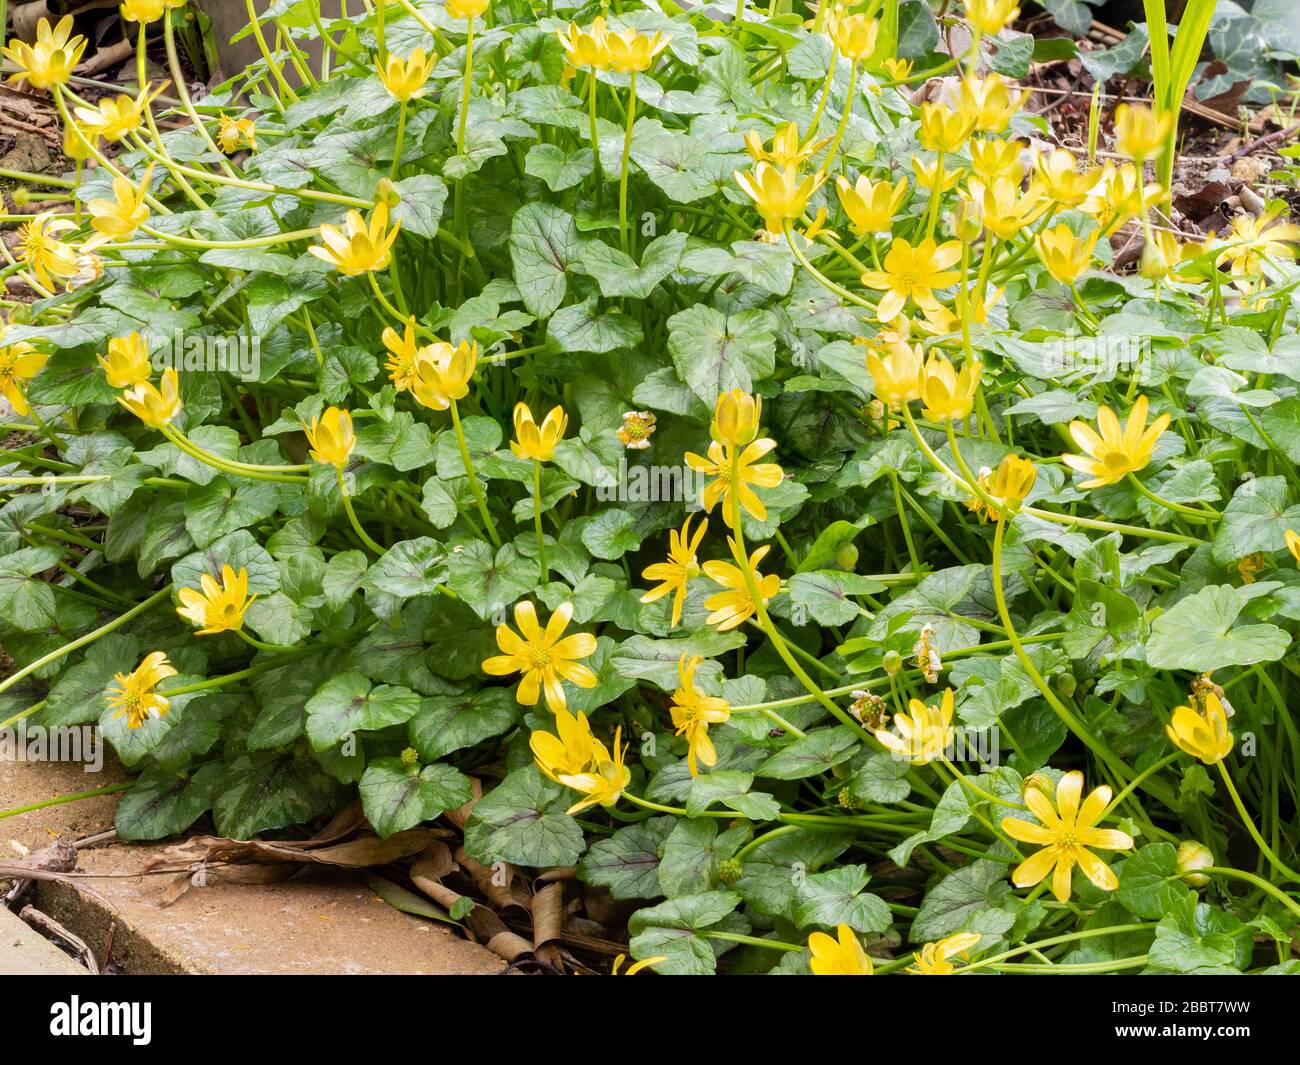 Yellow flowers of Ficaria verna, the lesser celandine, an ephemeral spring flowering UK wildflower and frequent garden weed Stock Photo